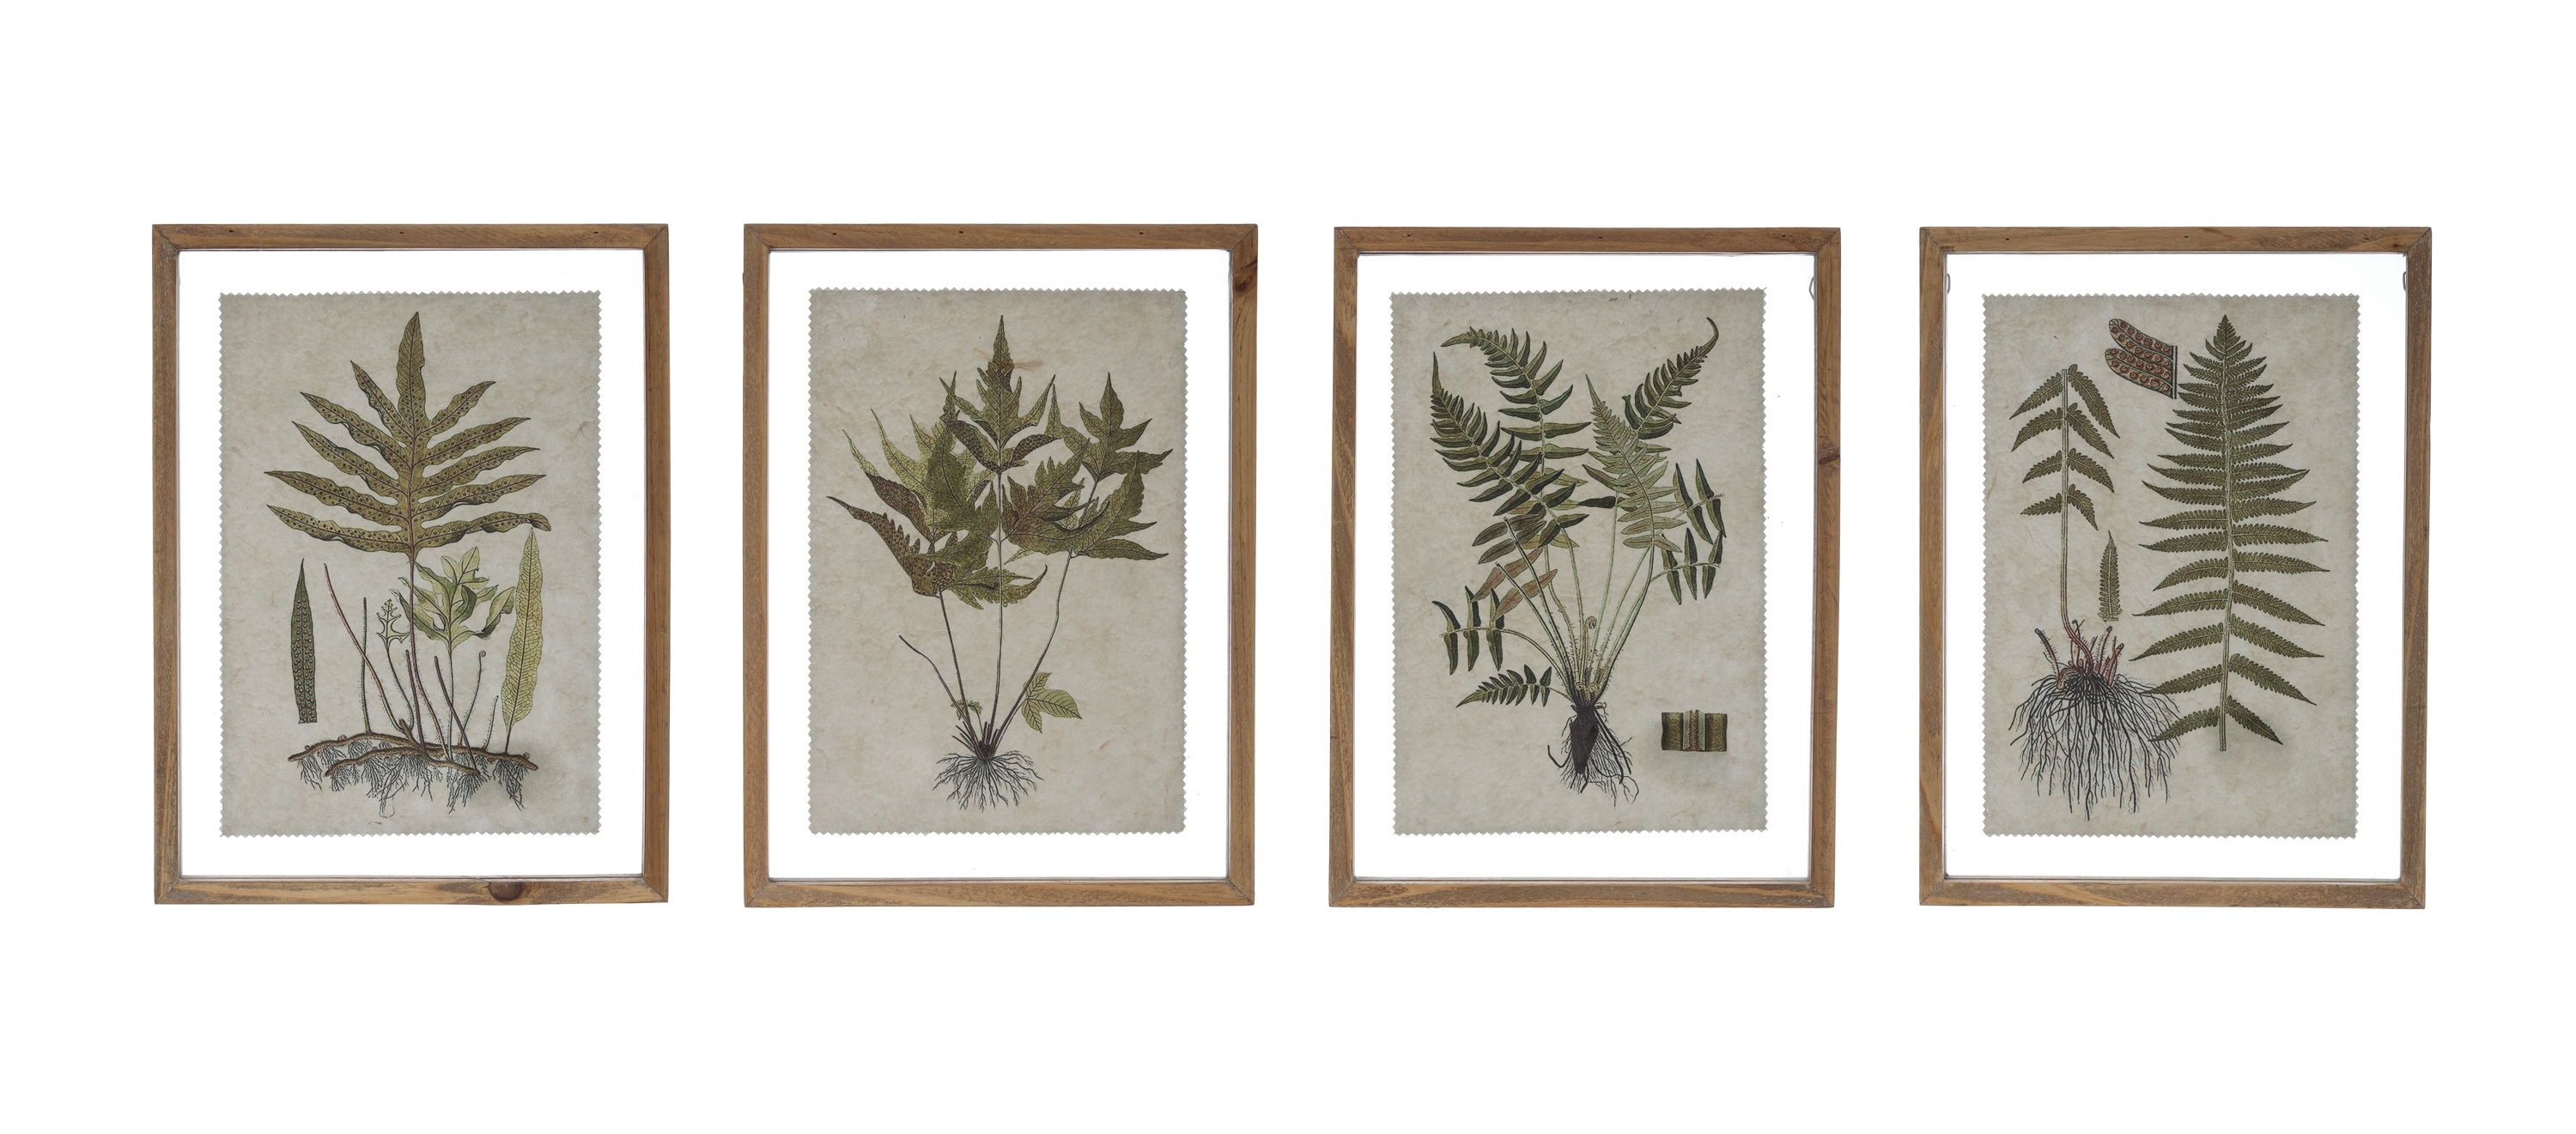 Botanical Print on Textured Material Wall Décor with Wood Frame (Set of 4 Styles) - Image 0